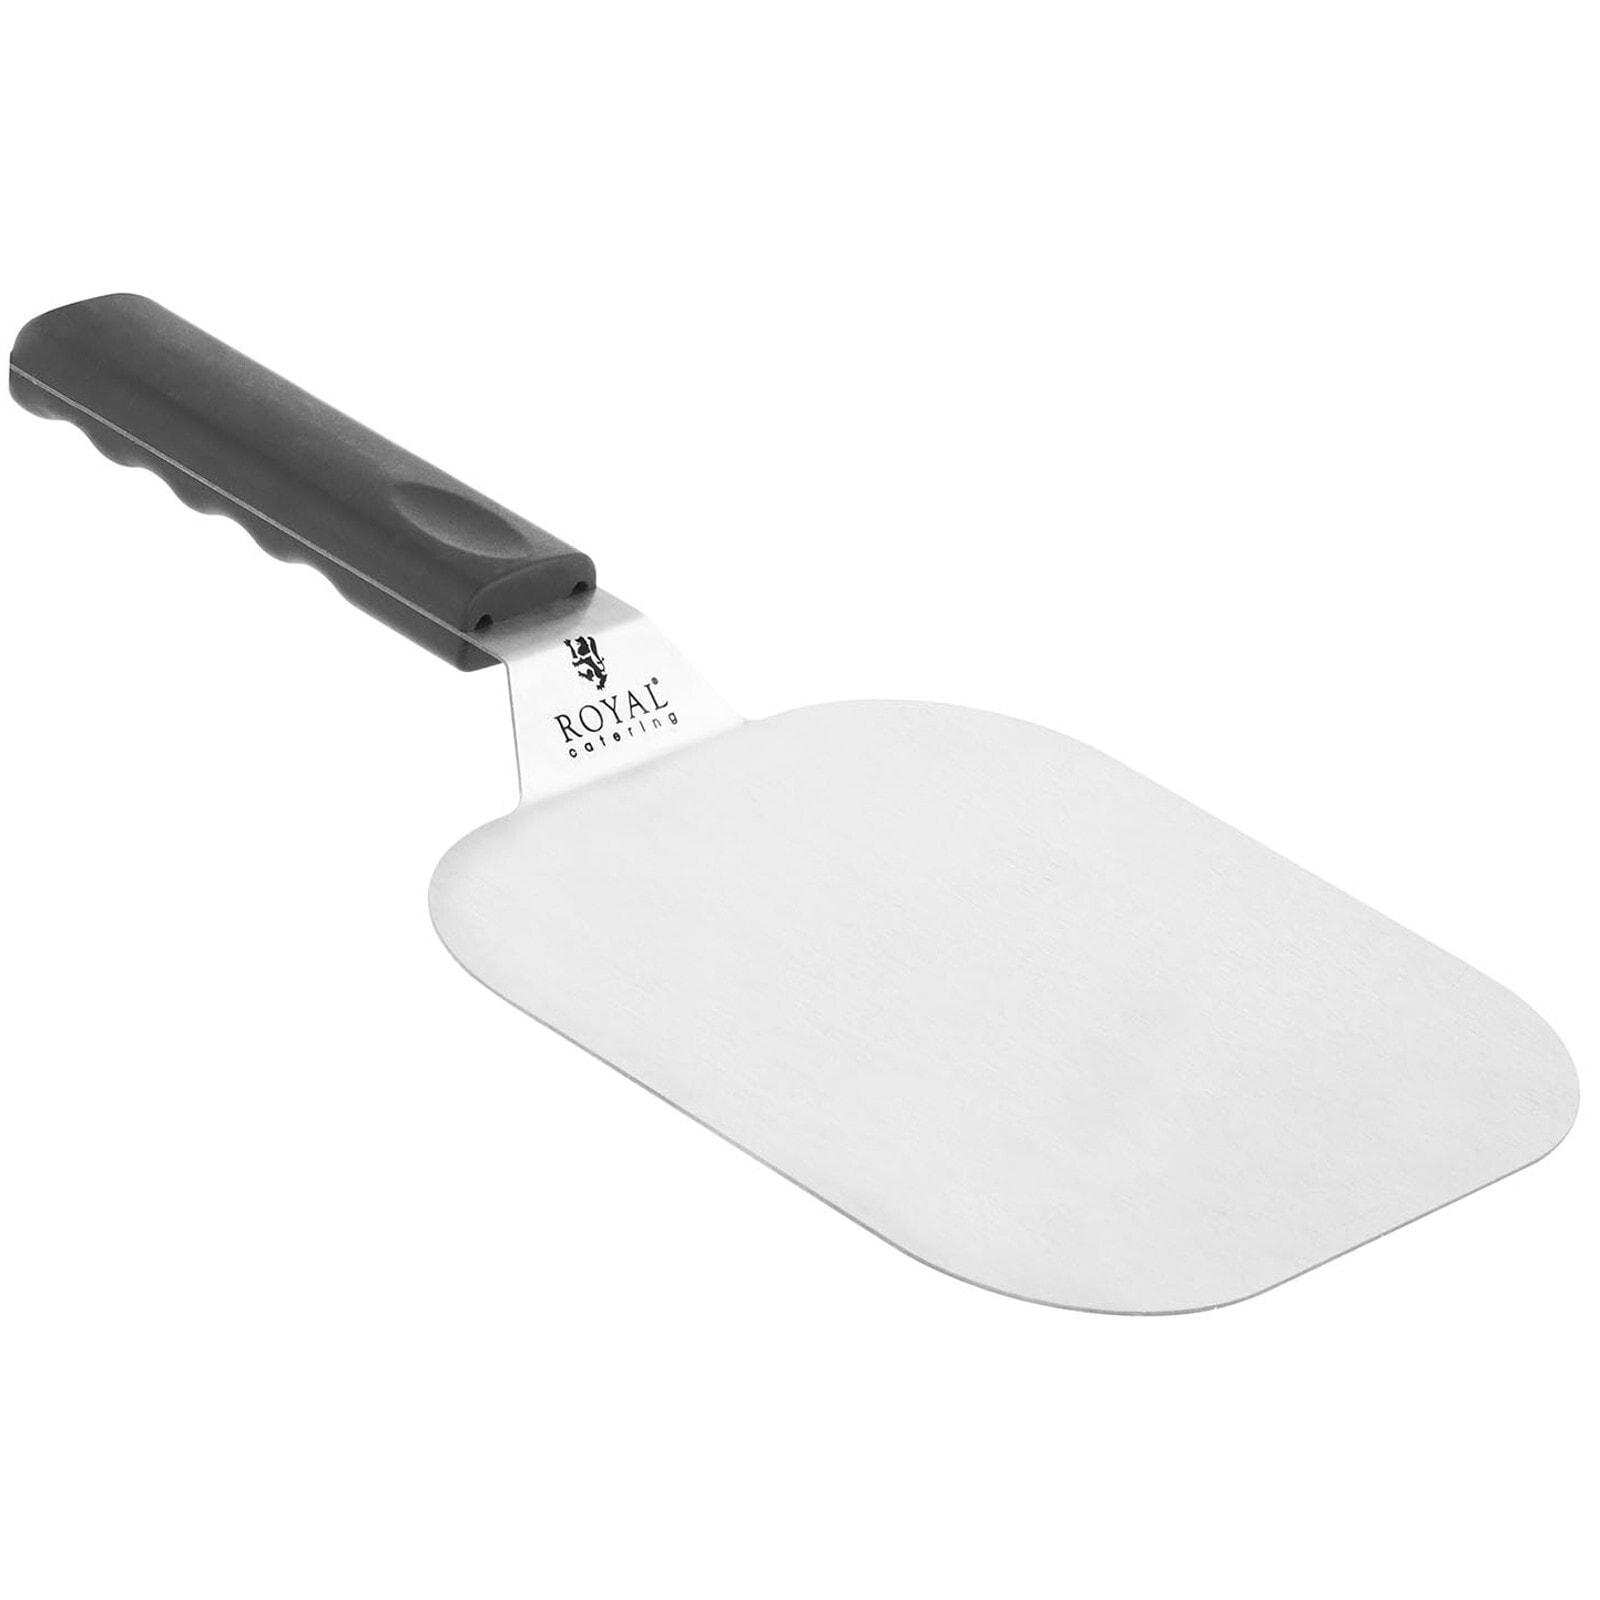 Large 38cm pizza serving shovel with plastic handle Royal Catering RCPS-380 / 180B